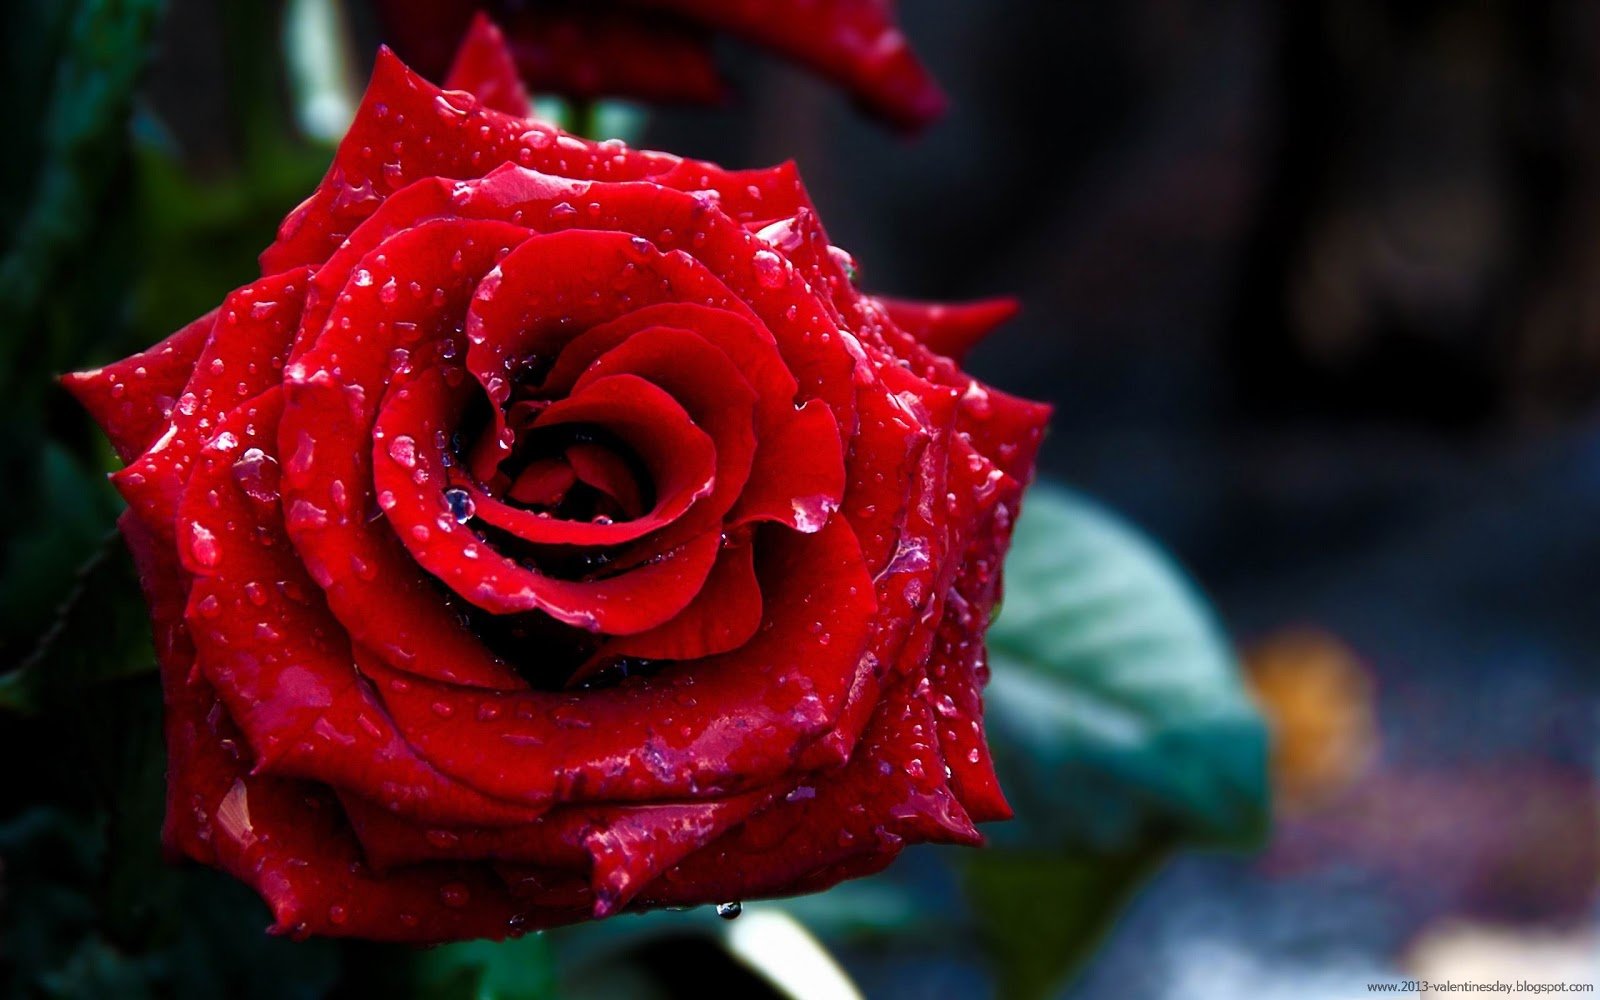 Rose Day 2016 HD Wallpaper and Red